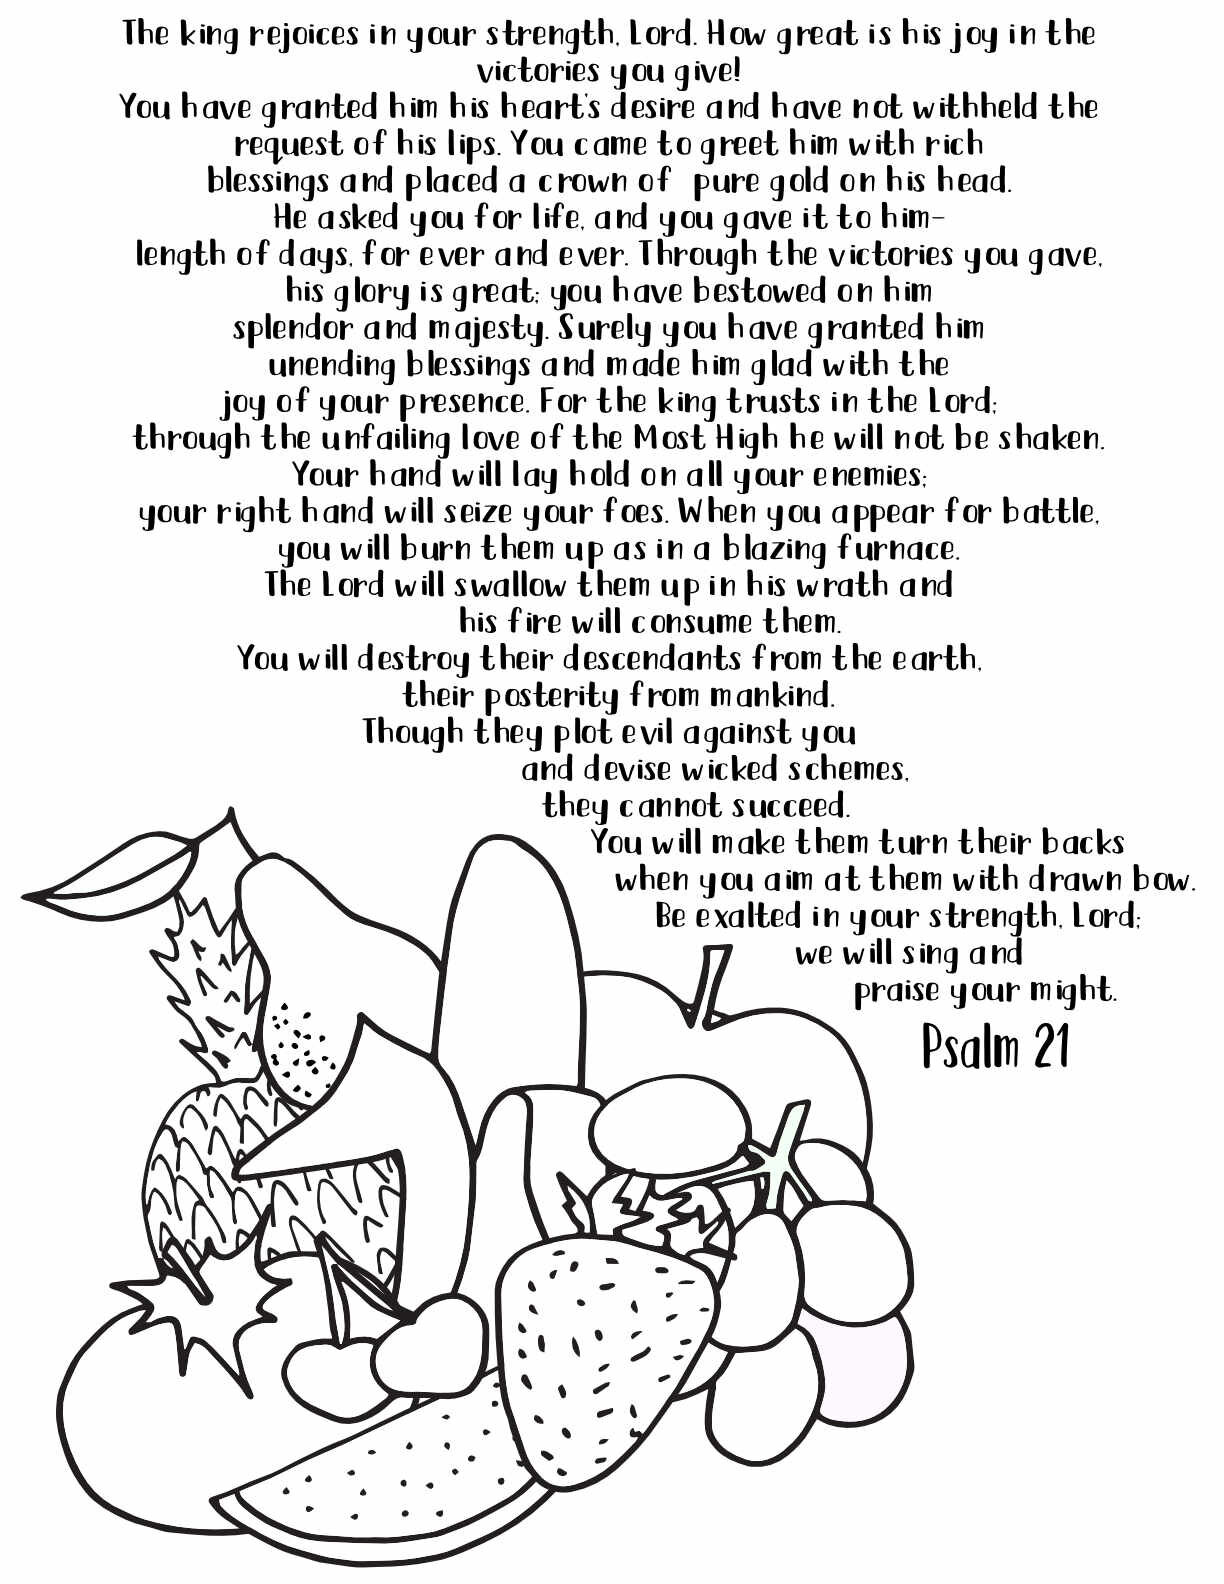 10 Free Printable Psalm Coloring Pages - Download and Color Adult Scripture - Psalm 21CLICK HERE TO DOWNLOAD THIS PAGE FREE